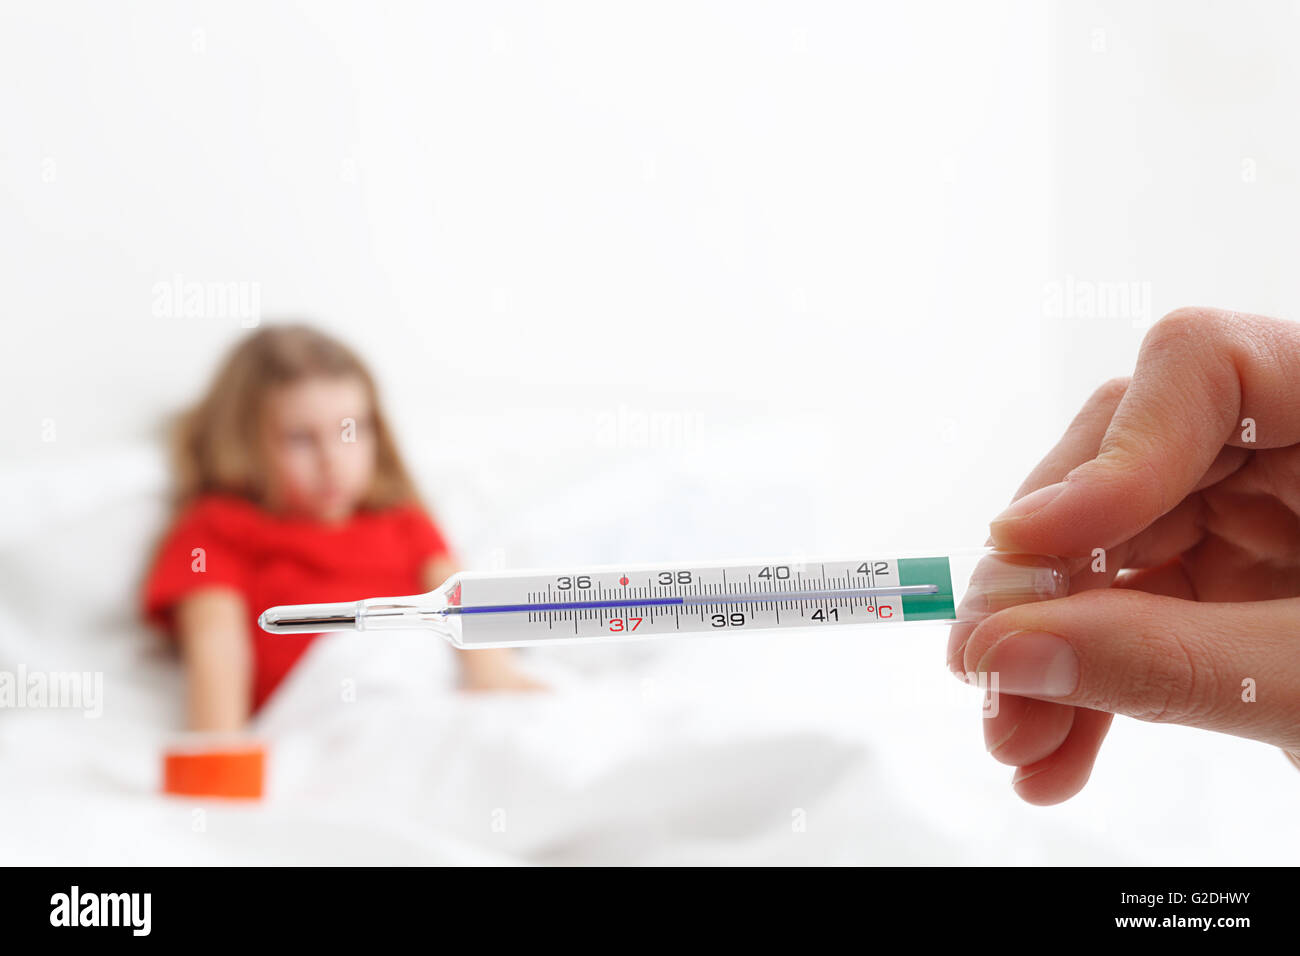 pediatric doctor hand holding a thermometer indicating fever with blurry child in background Stock Photo